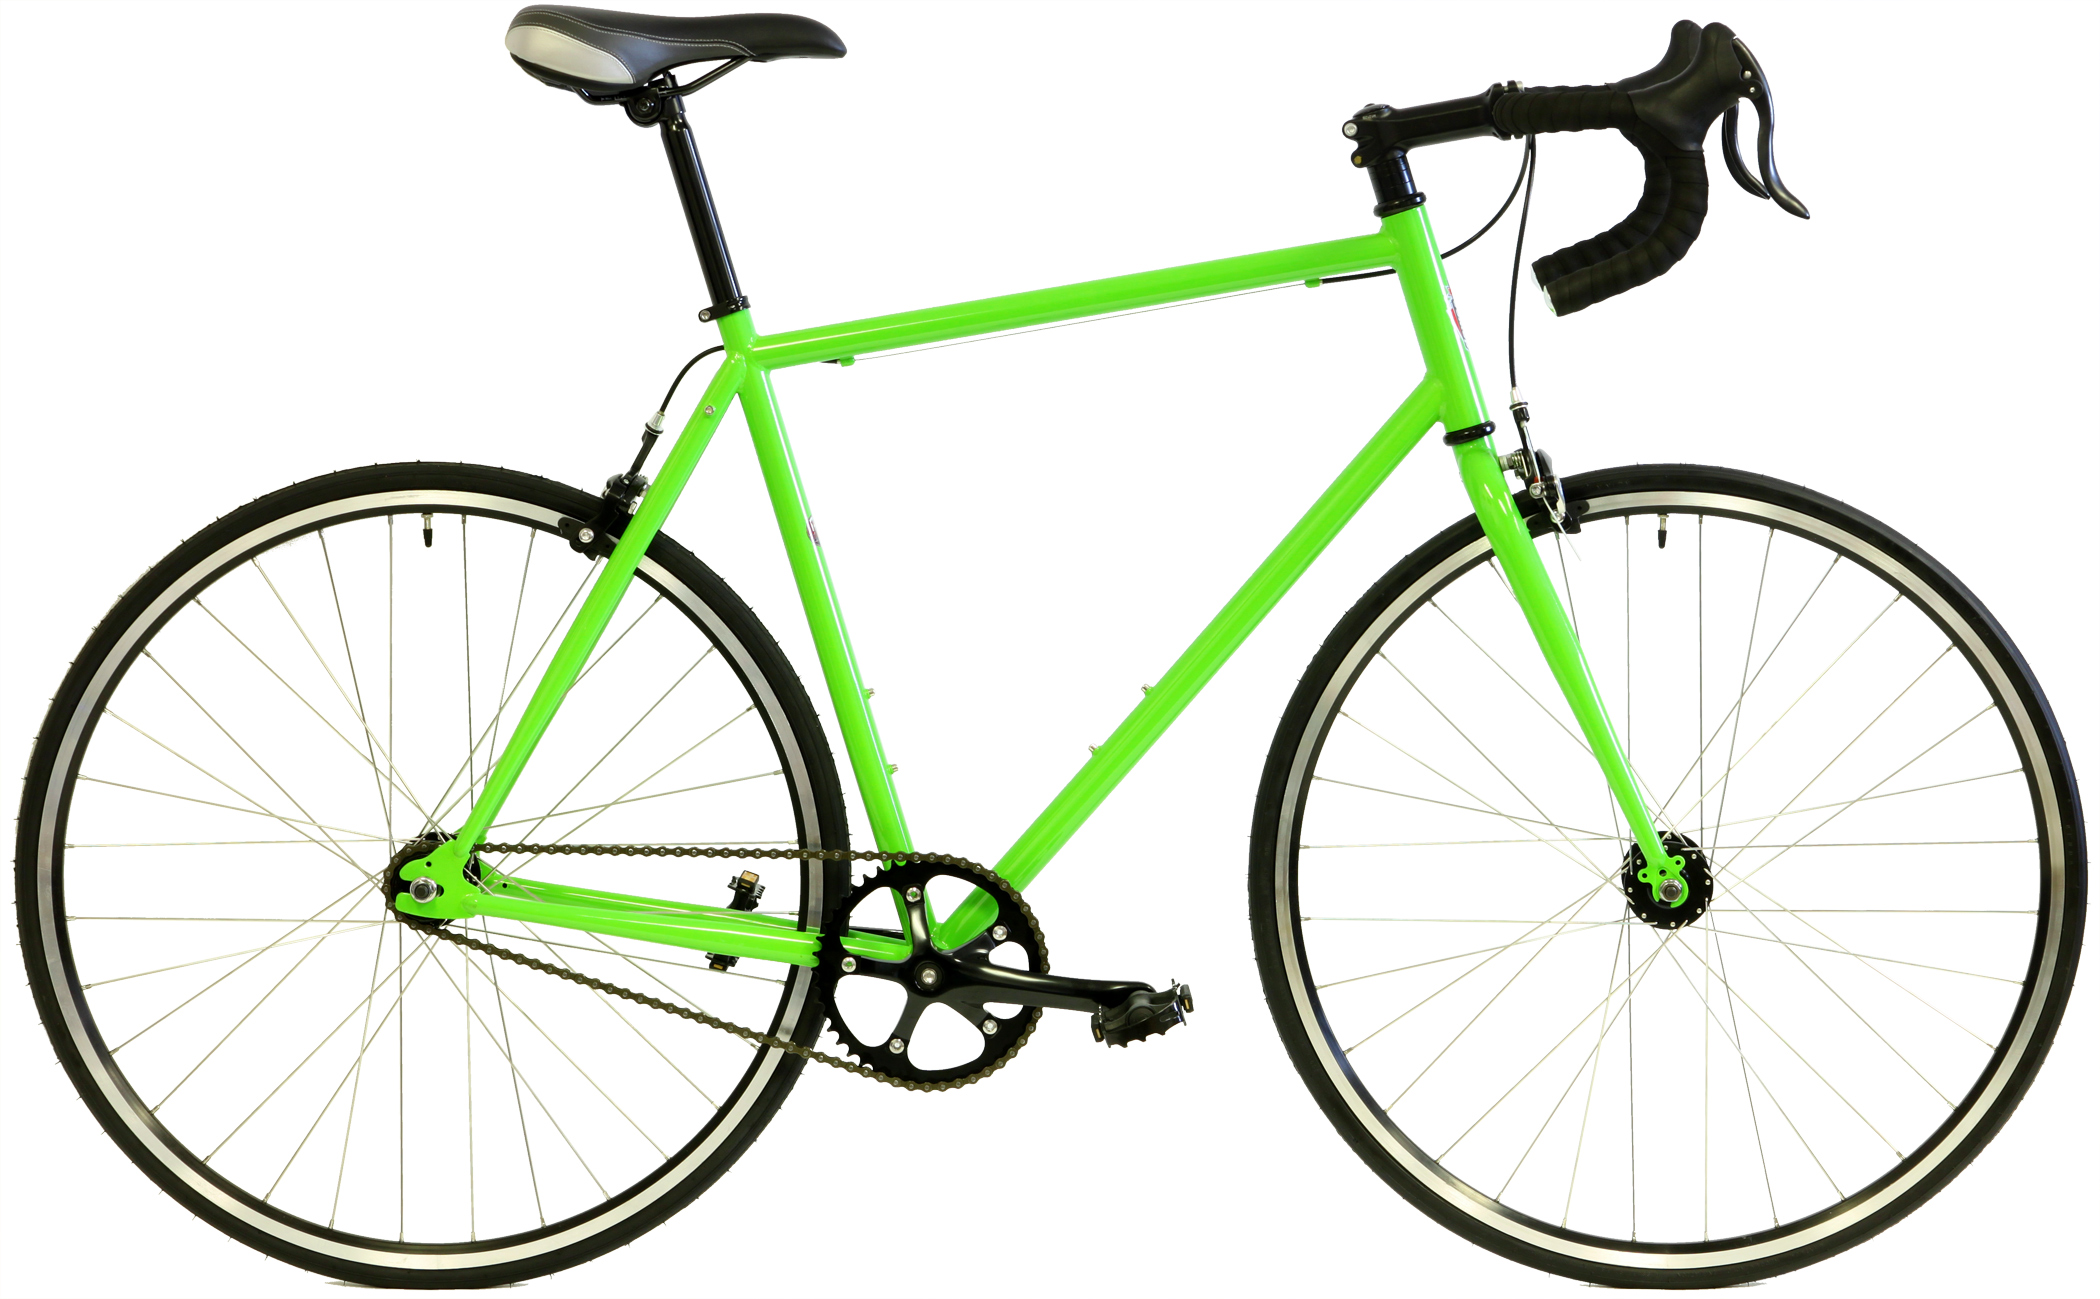 Save Up to 60% Off Fixie Road Bikes | Track Bikes | Fixed Gear ...